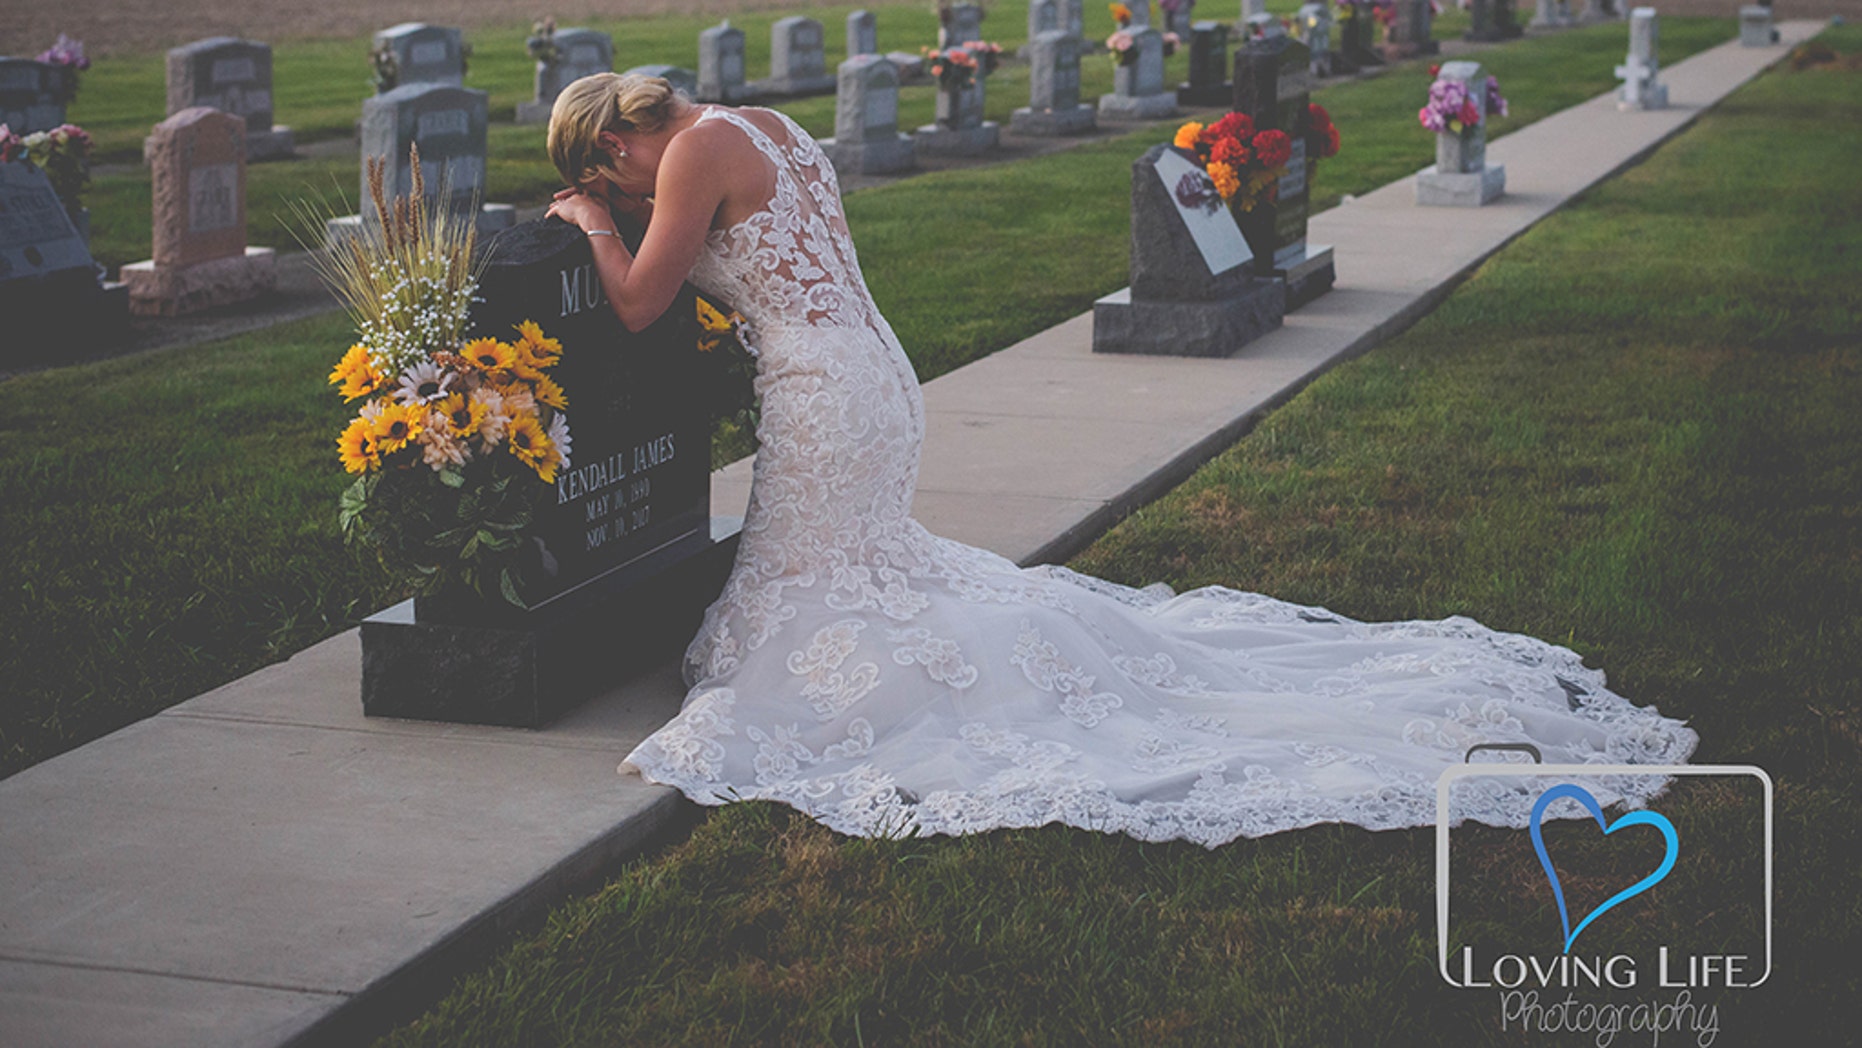 Jessica Padgett took pictures of her marriage alone after her fiance was killed by an alleged drunk driver last year.